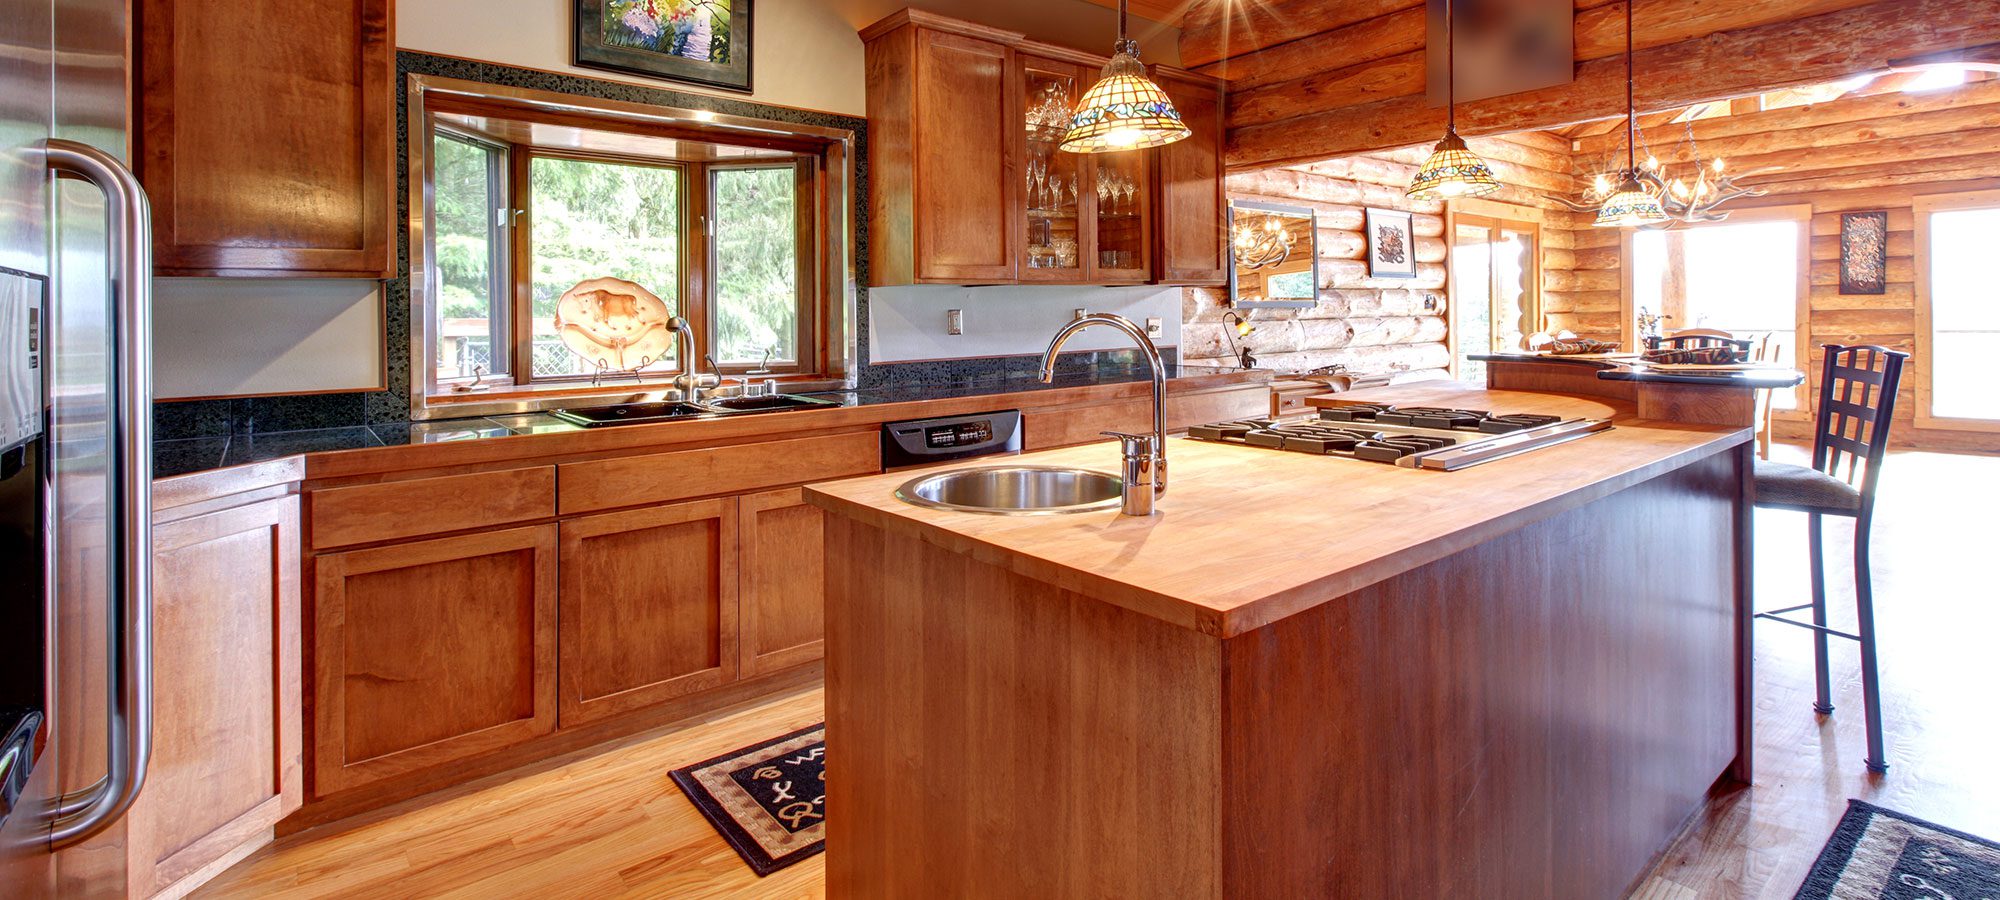 Wood Kitchen Cabinets in Cabin